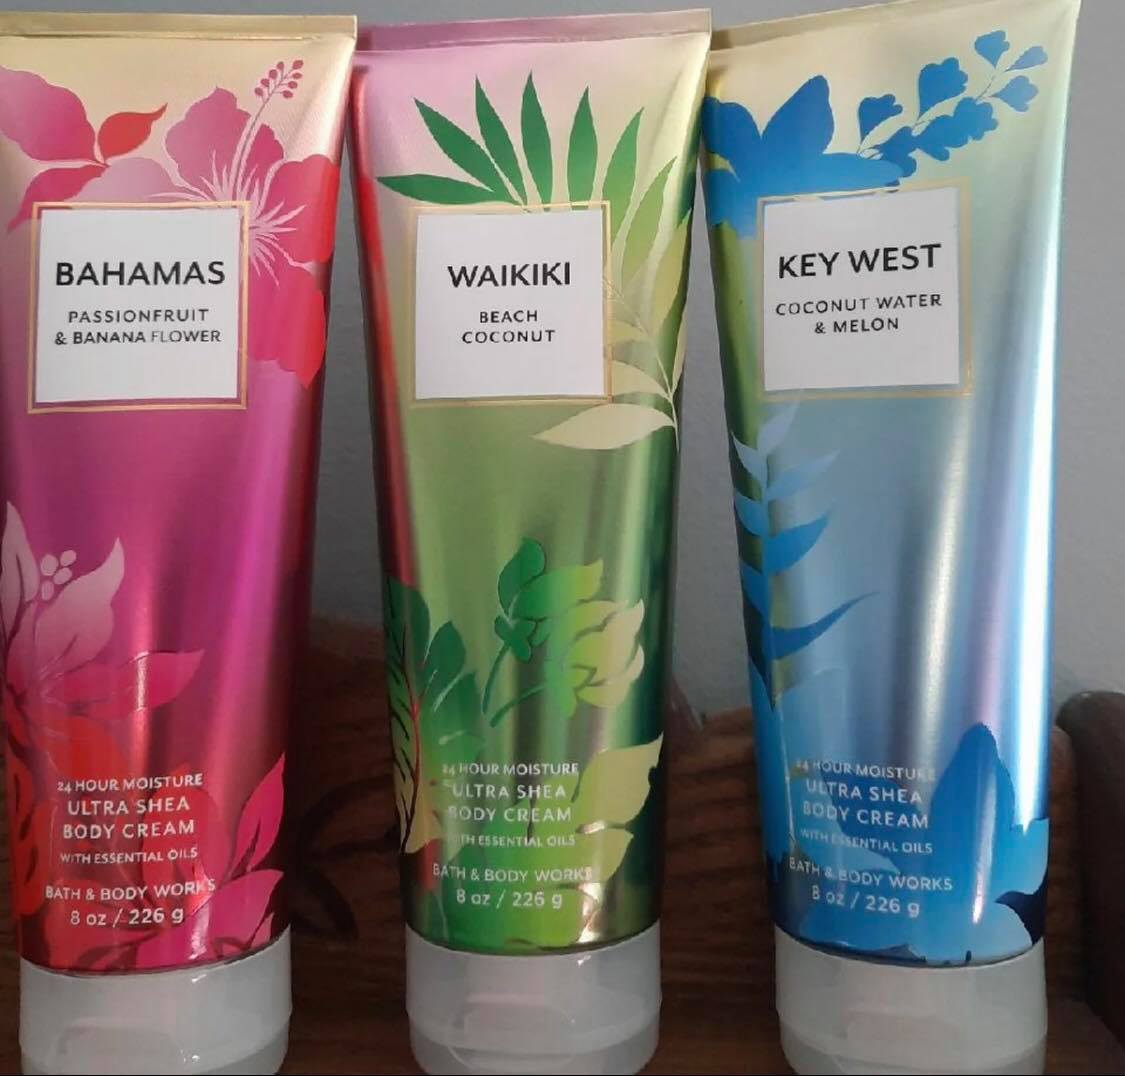 Life Inside the Page: Bath & Body Works  First Look At 2021 Signature  Tropical Destinations Body Care Collection - Waikiki Beach Coconut -  Bahamas Passion Fruit and Banana Flower - Oahu